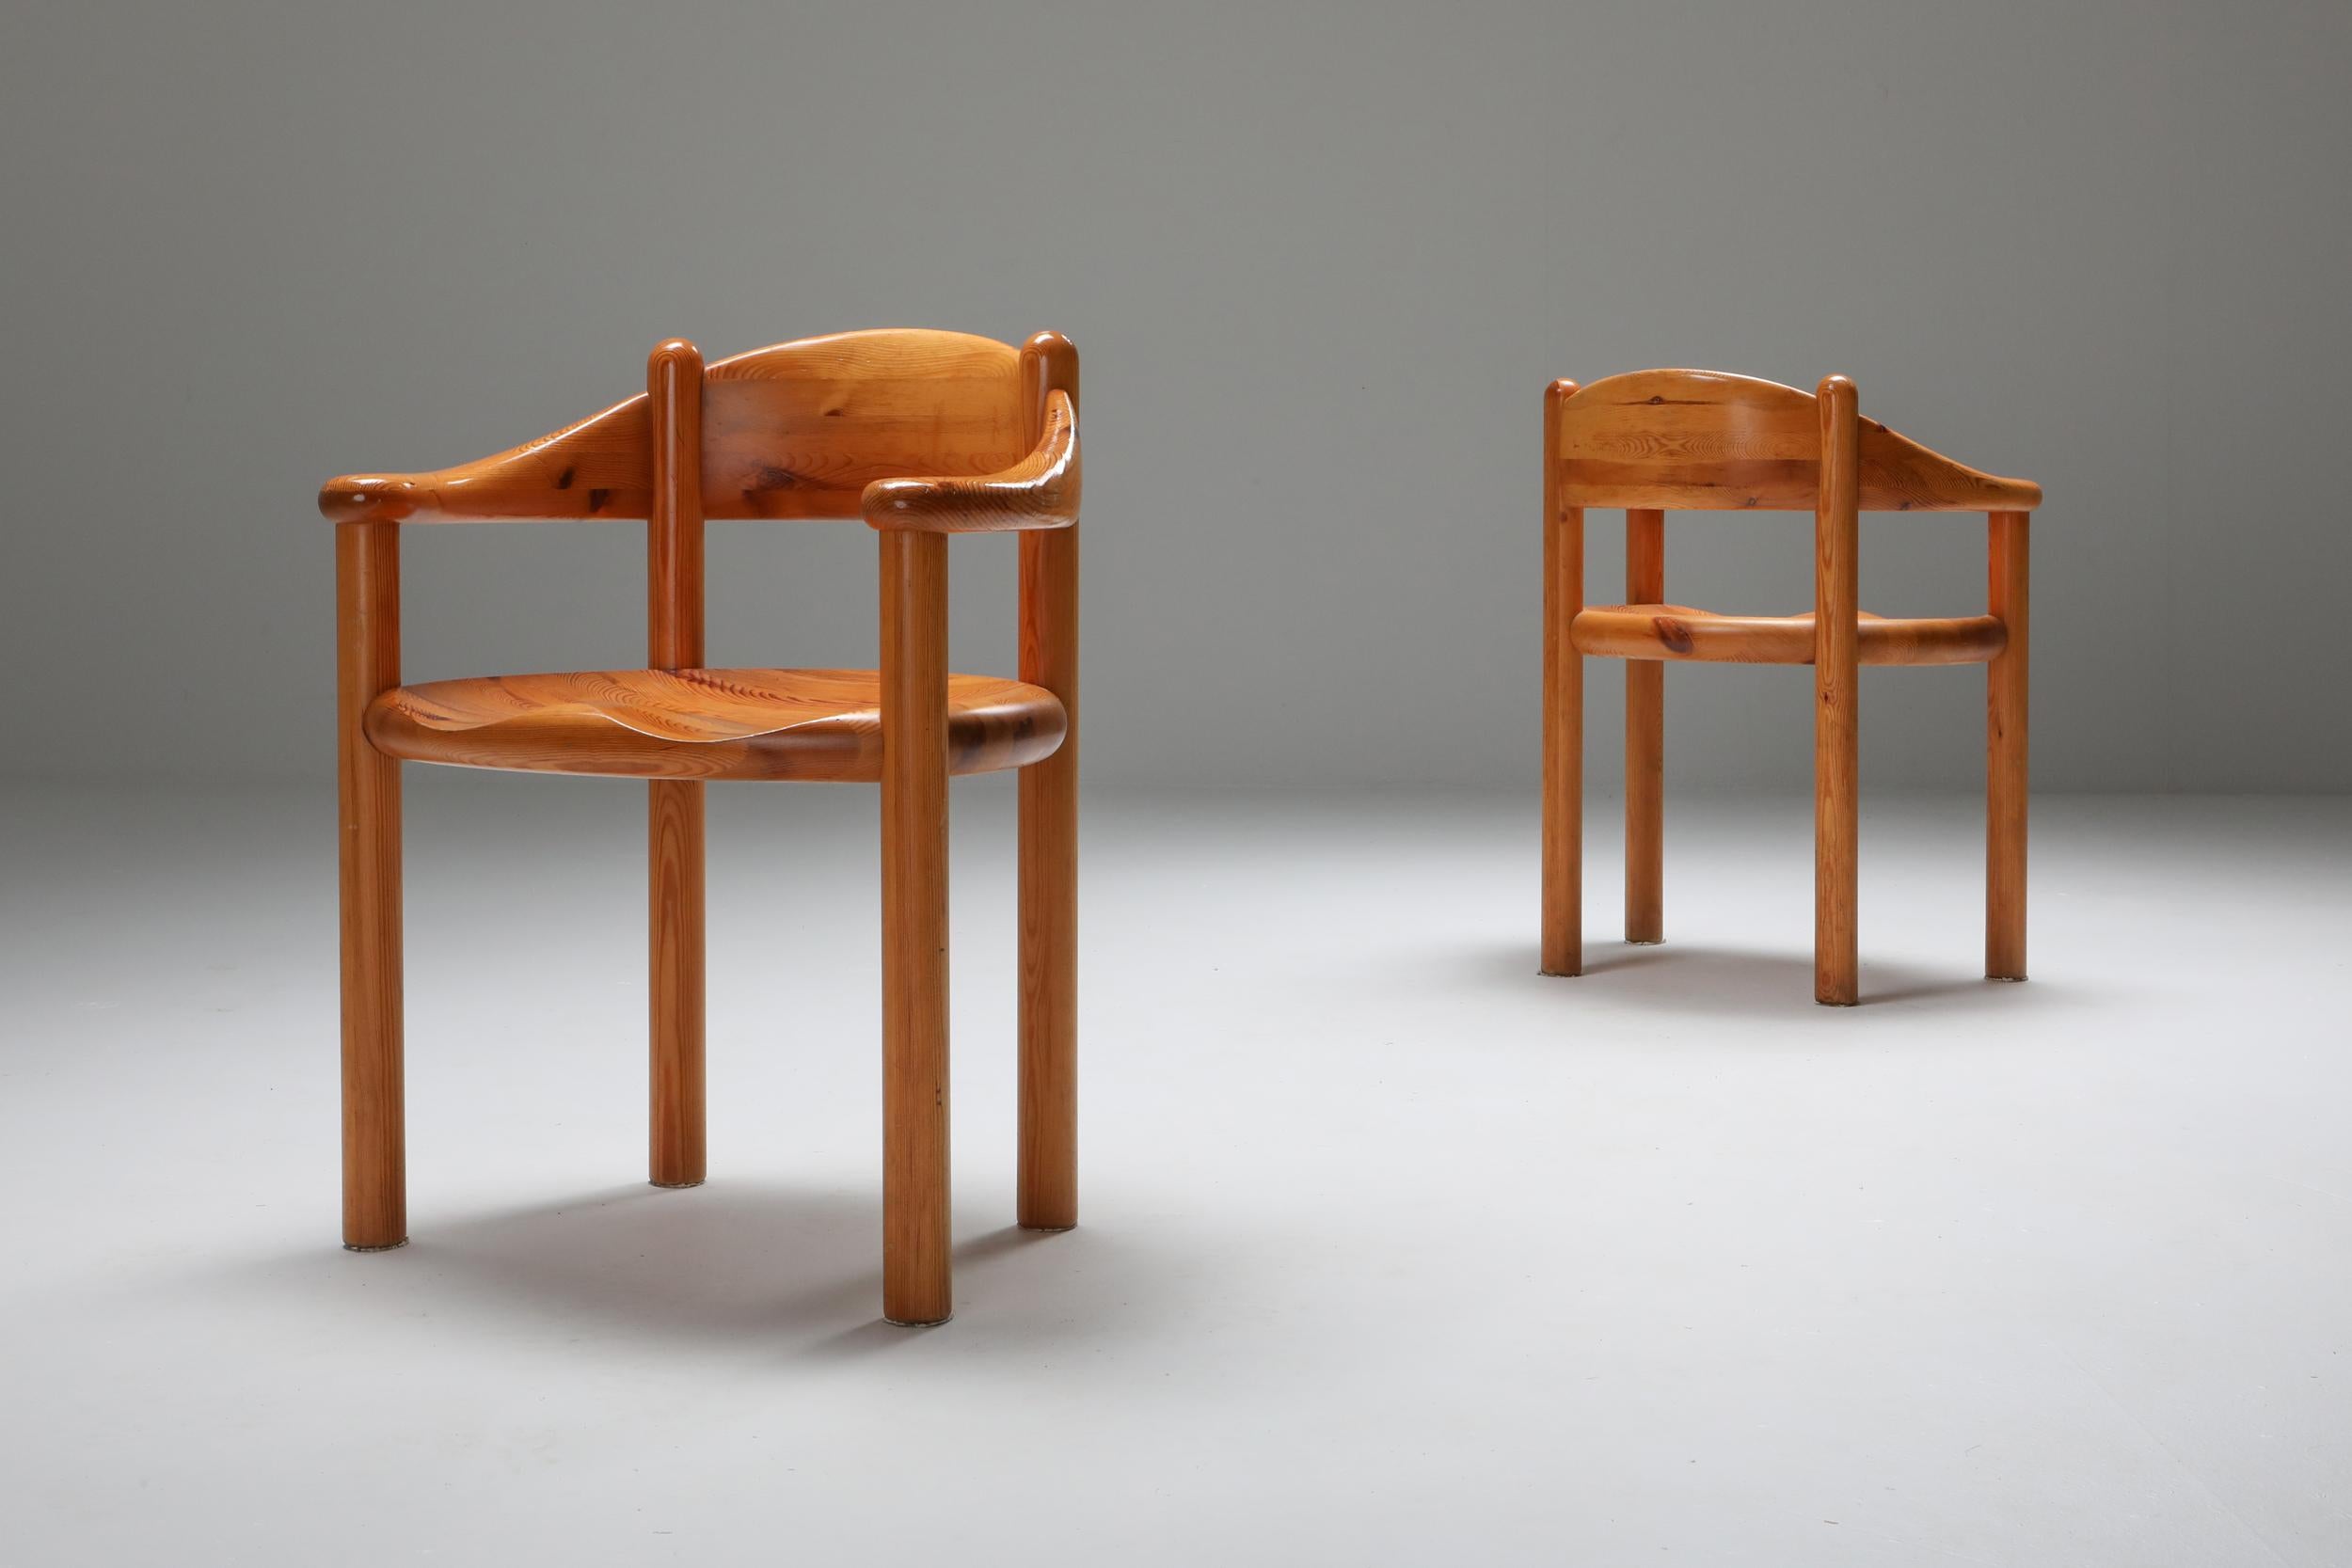 Rainer Daumiller for Hirtshals Savvaerk, set of four armchairs, pine, Denmark, 1970s. 

Set of four armchairs in solid pine. 
A simplistic design with a round seating and full attention for the natural expression and grain of the wood. These